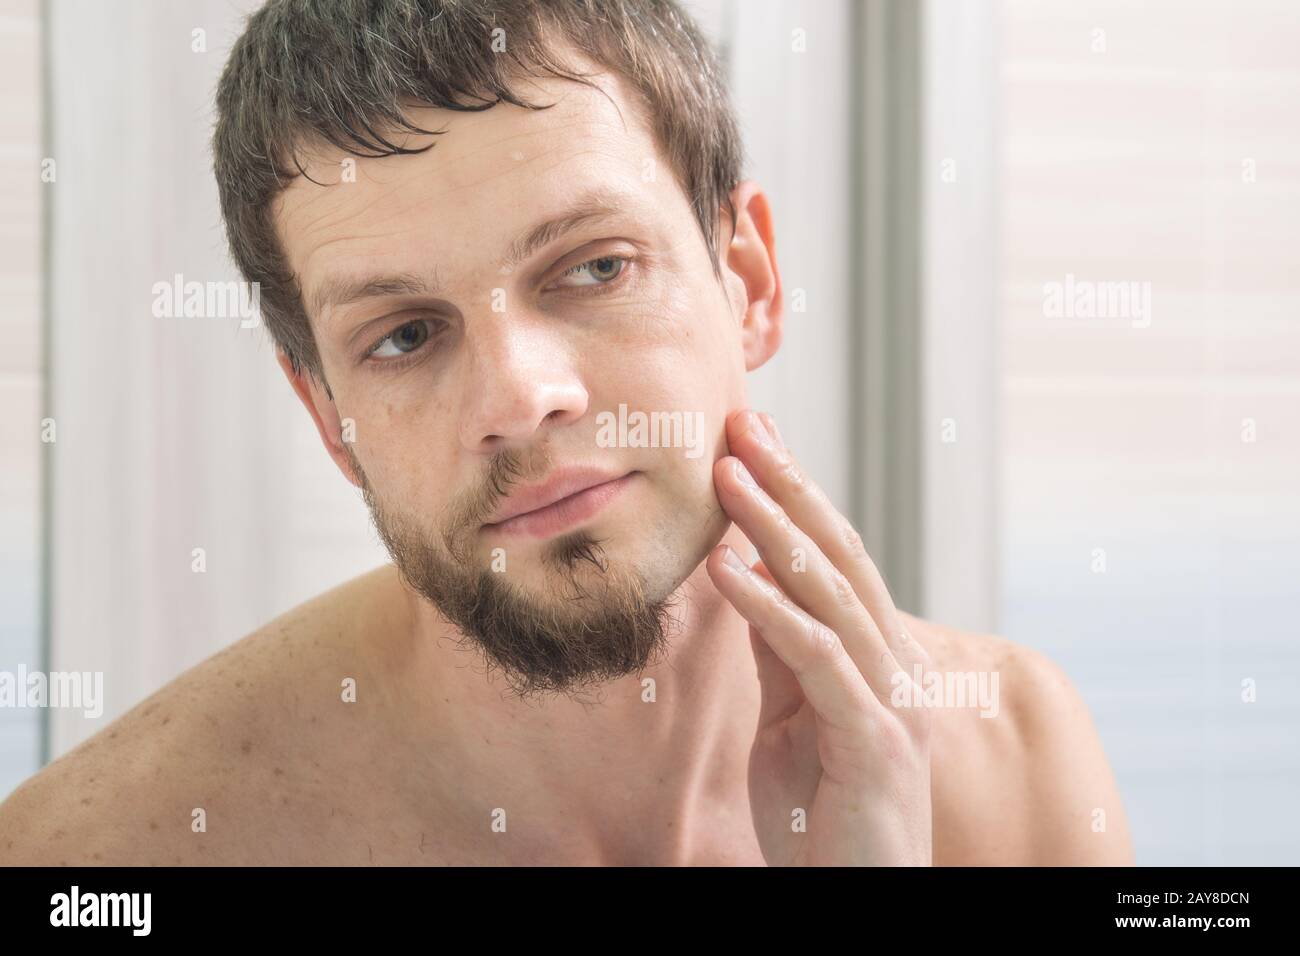 The guy shaved one half of his face and looks in the mirror evaluating the result Stock Photo